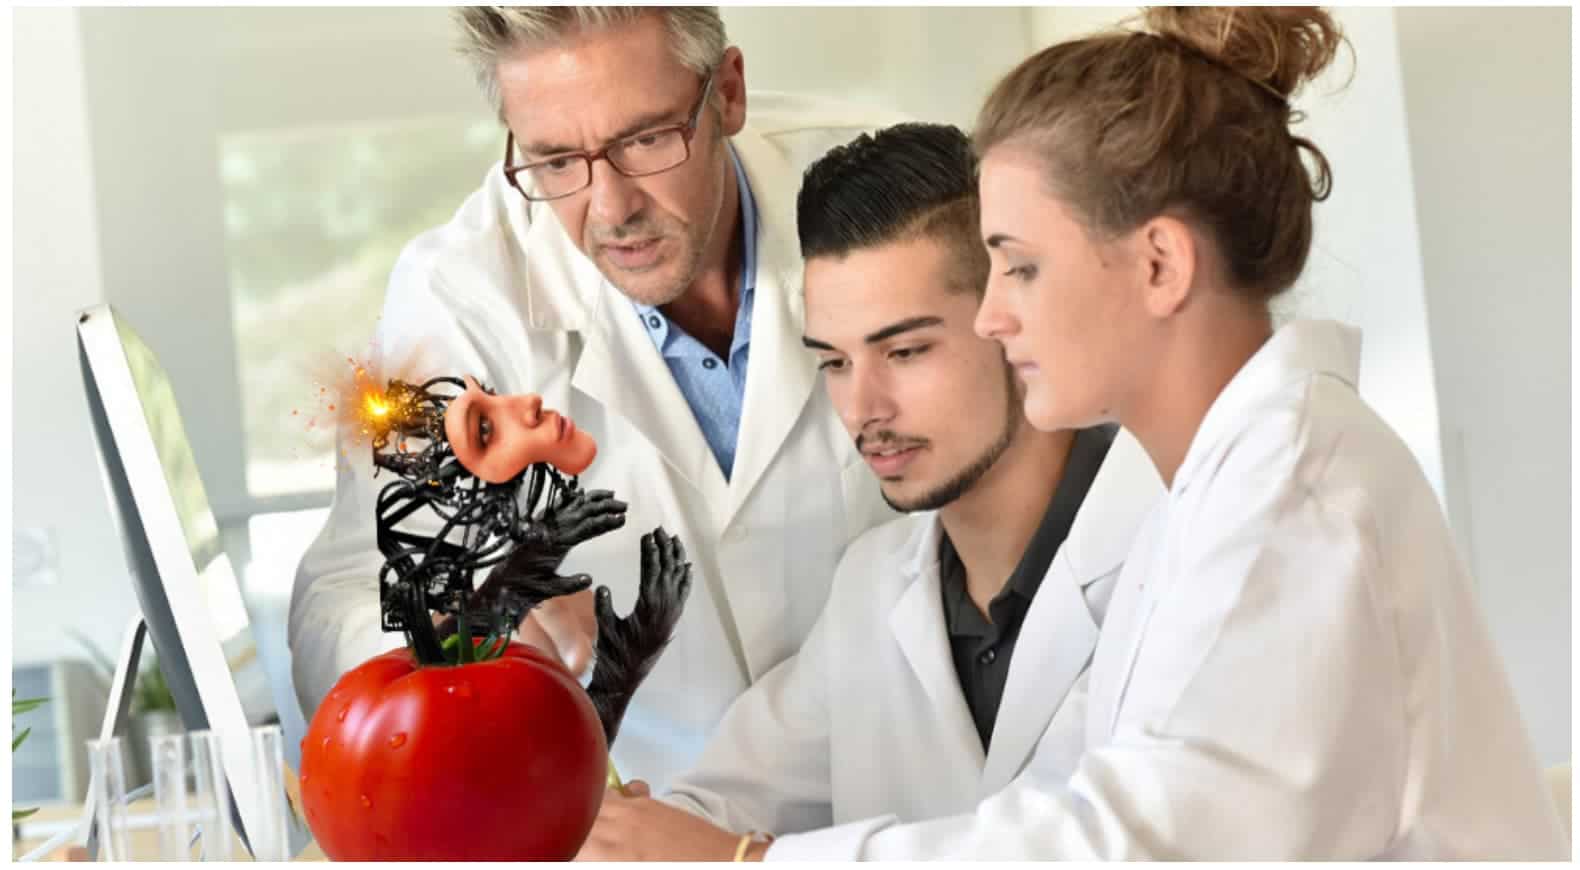 The scientists look at a robot/tomato hybrid.